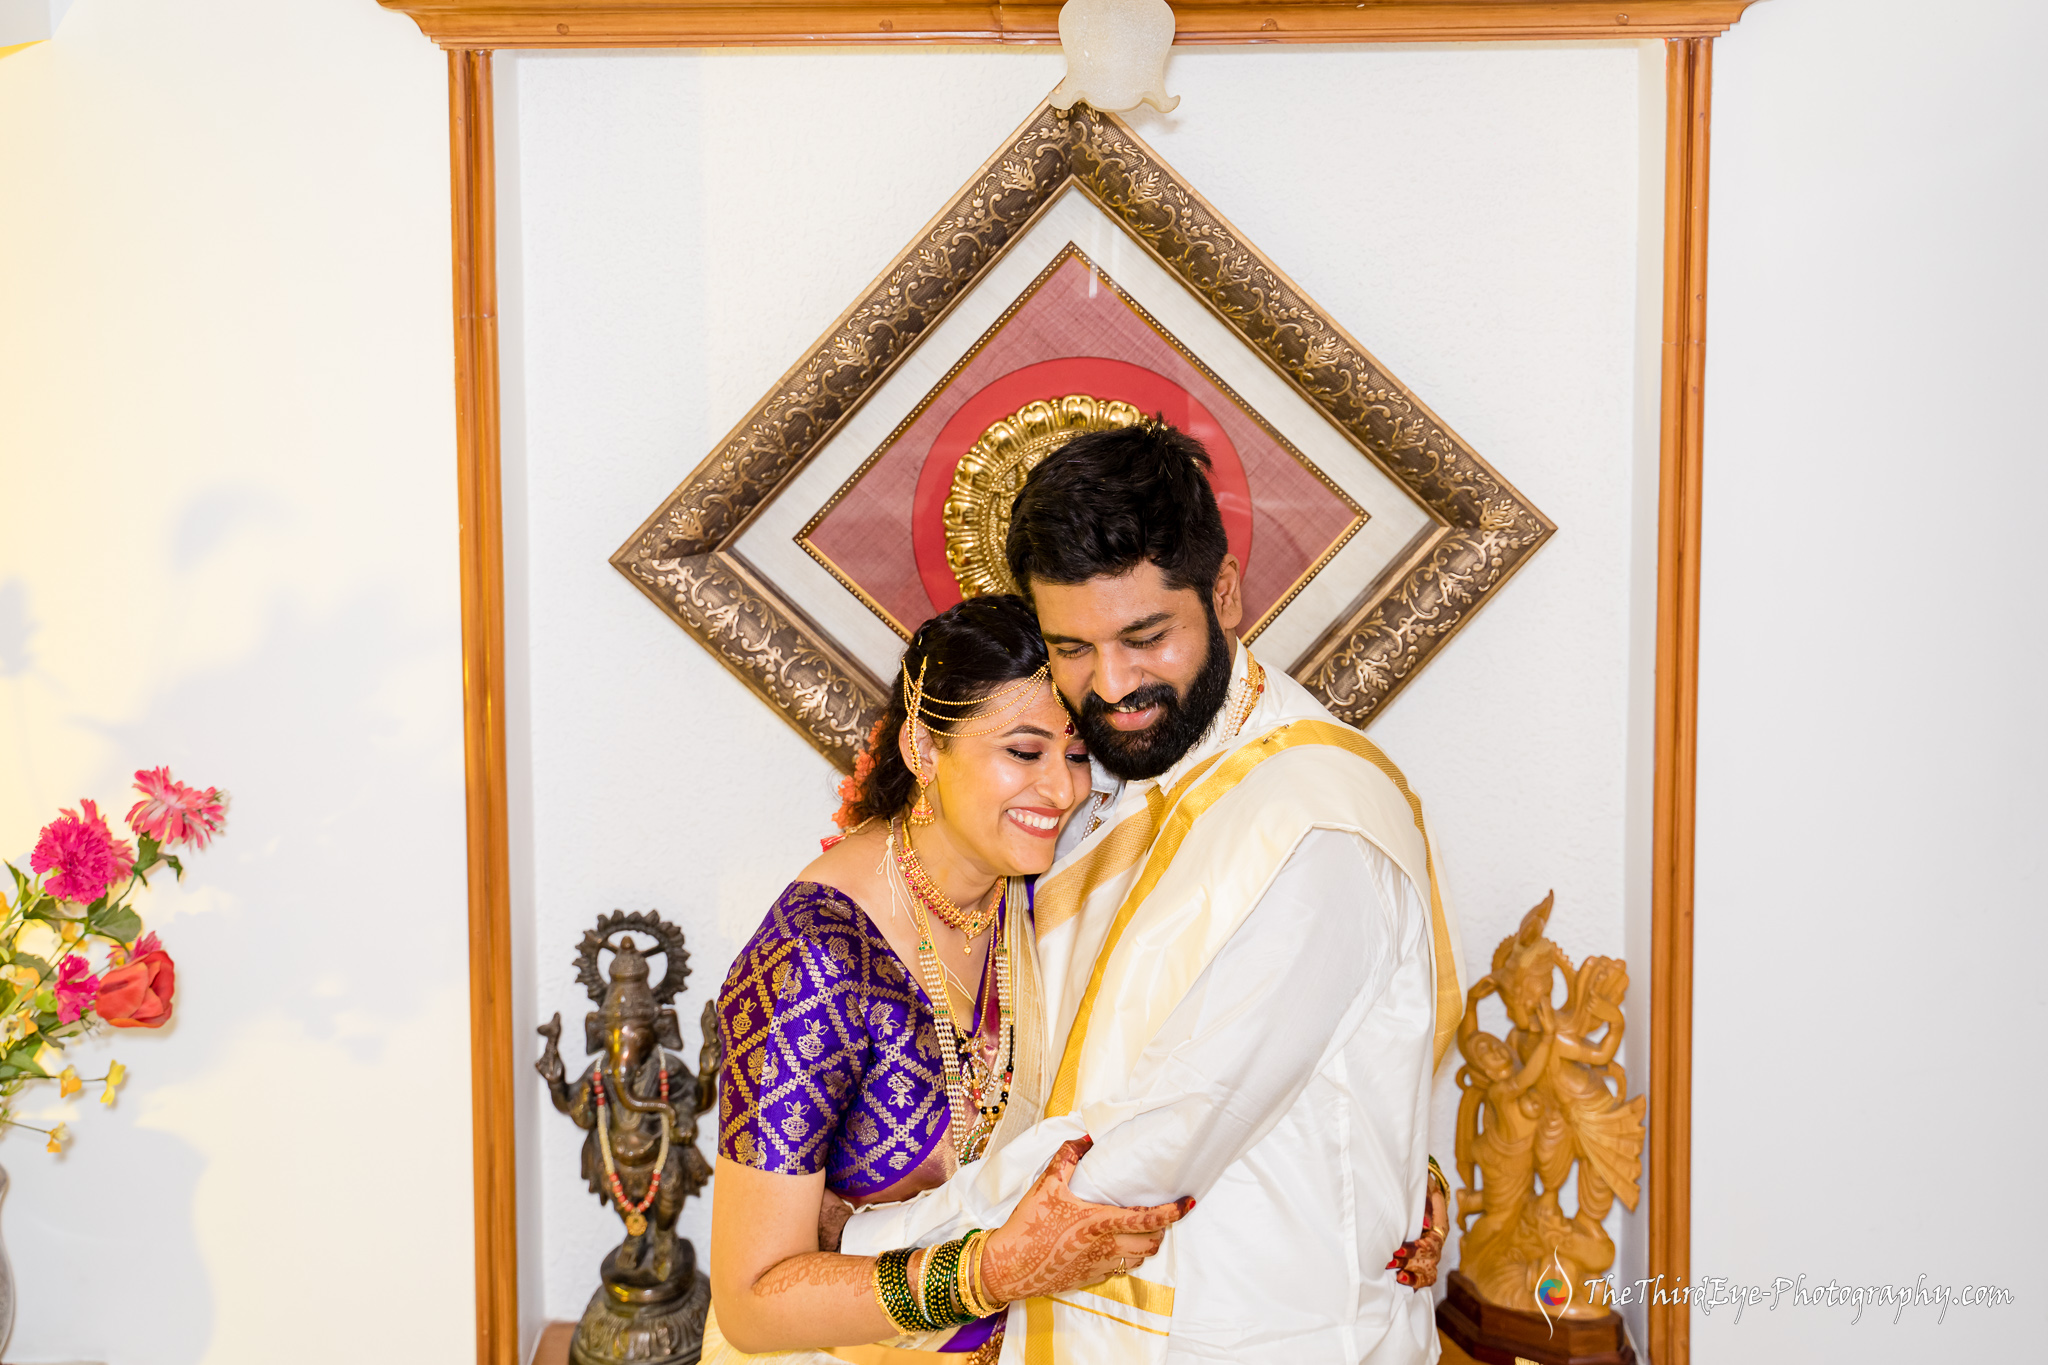 Portraits-cuddle-intimate-most-bride-groom-couple-happy-winning-framing-Best-South-indian-Candid-Wedding-photographer-Covid-19-Corona-quarantine-TTEP_CM_45_A7009659